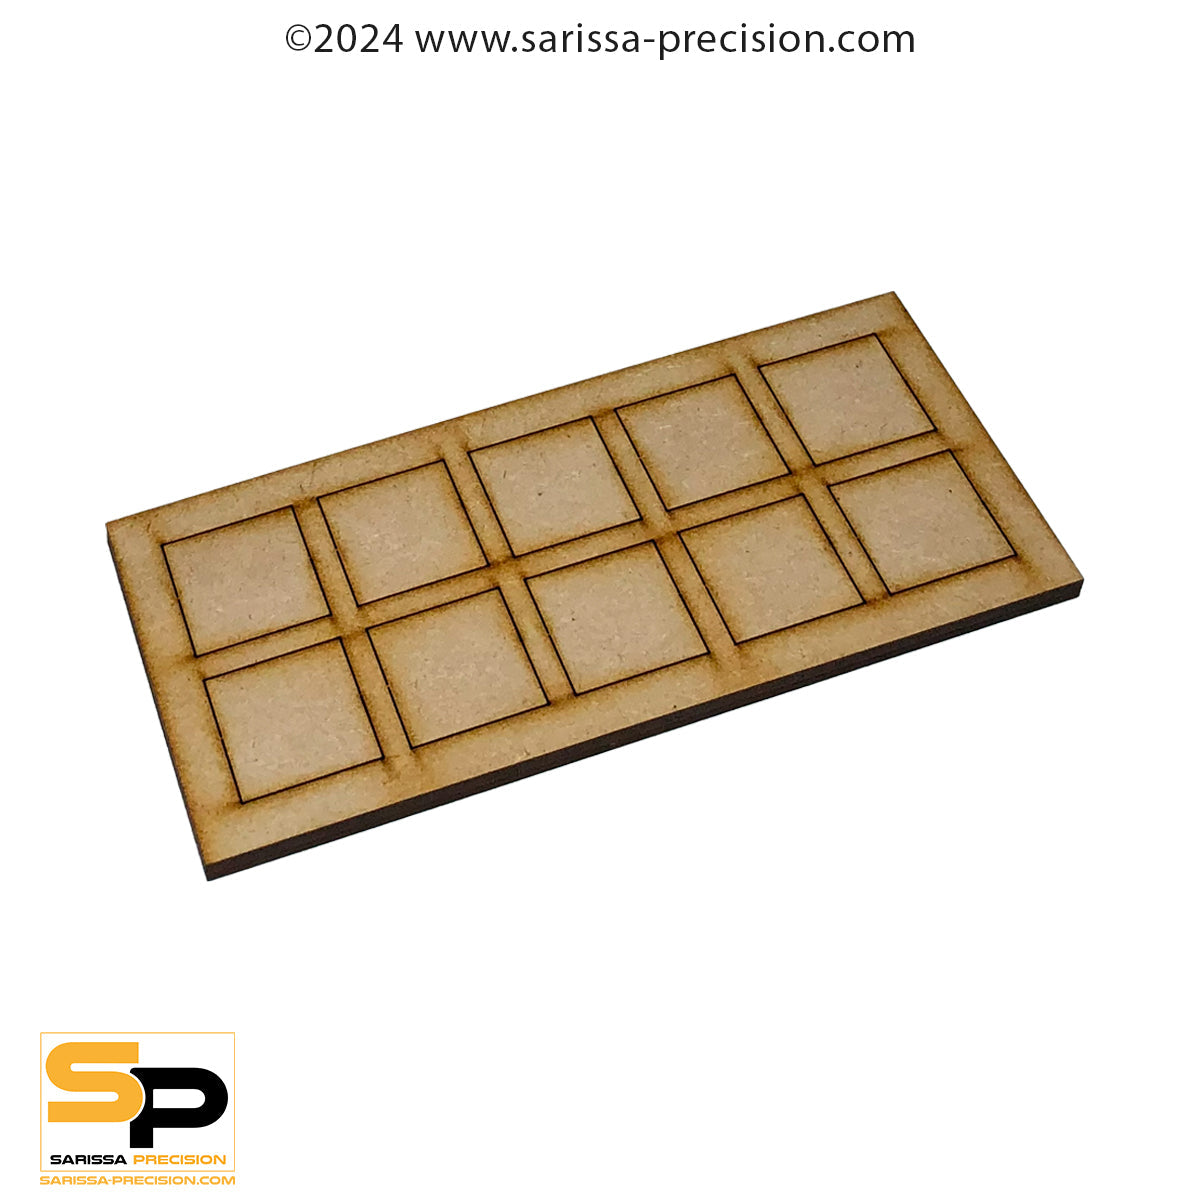 15x11 30x30mm Conversion Tray for 25x25mm bases